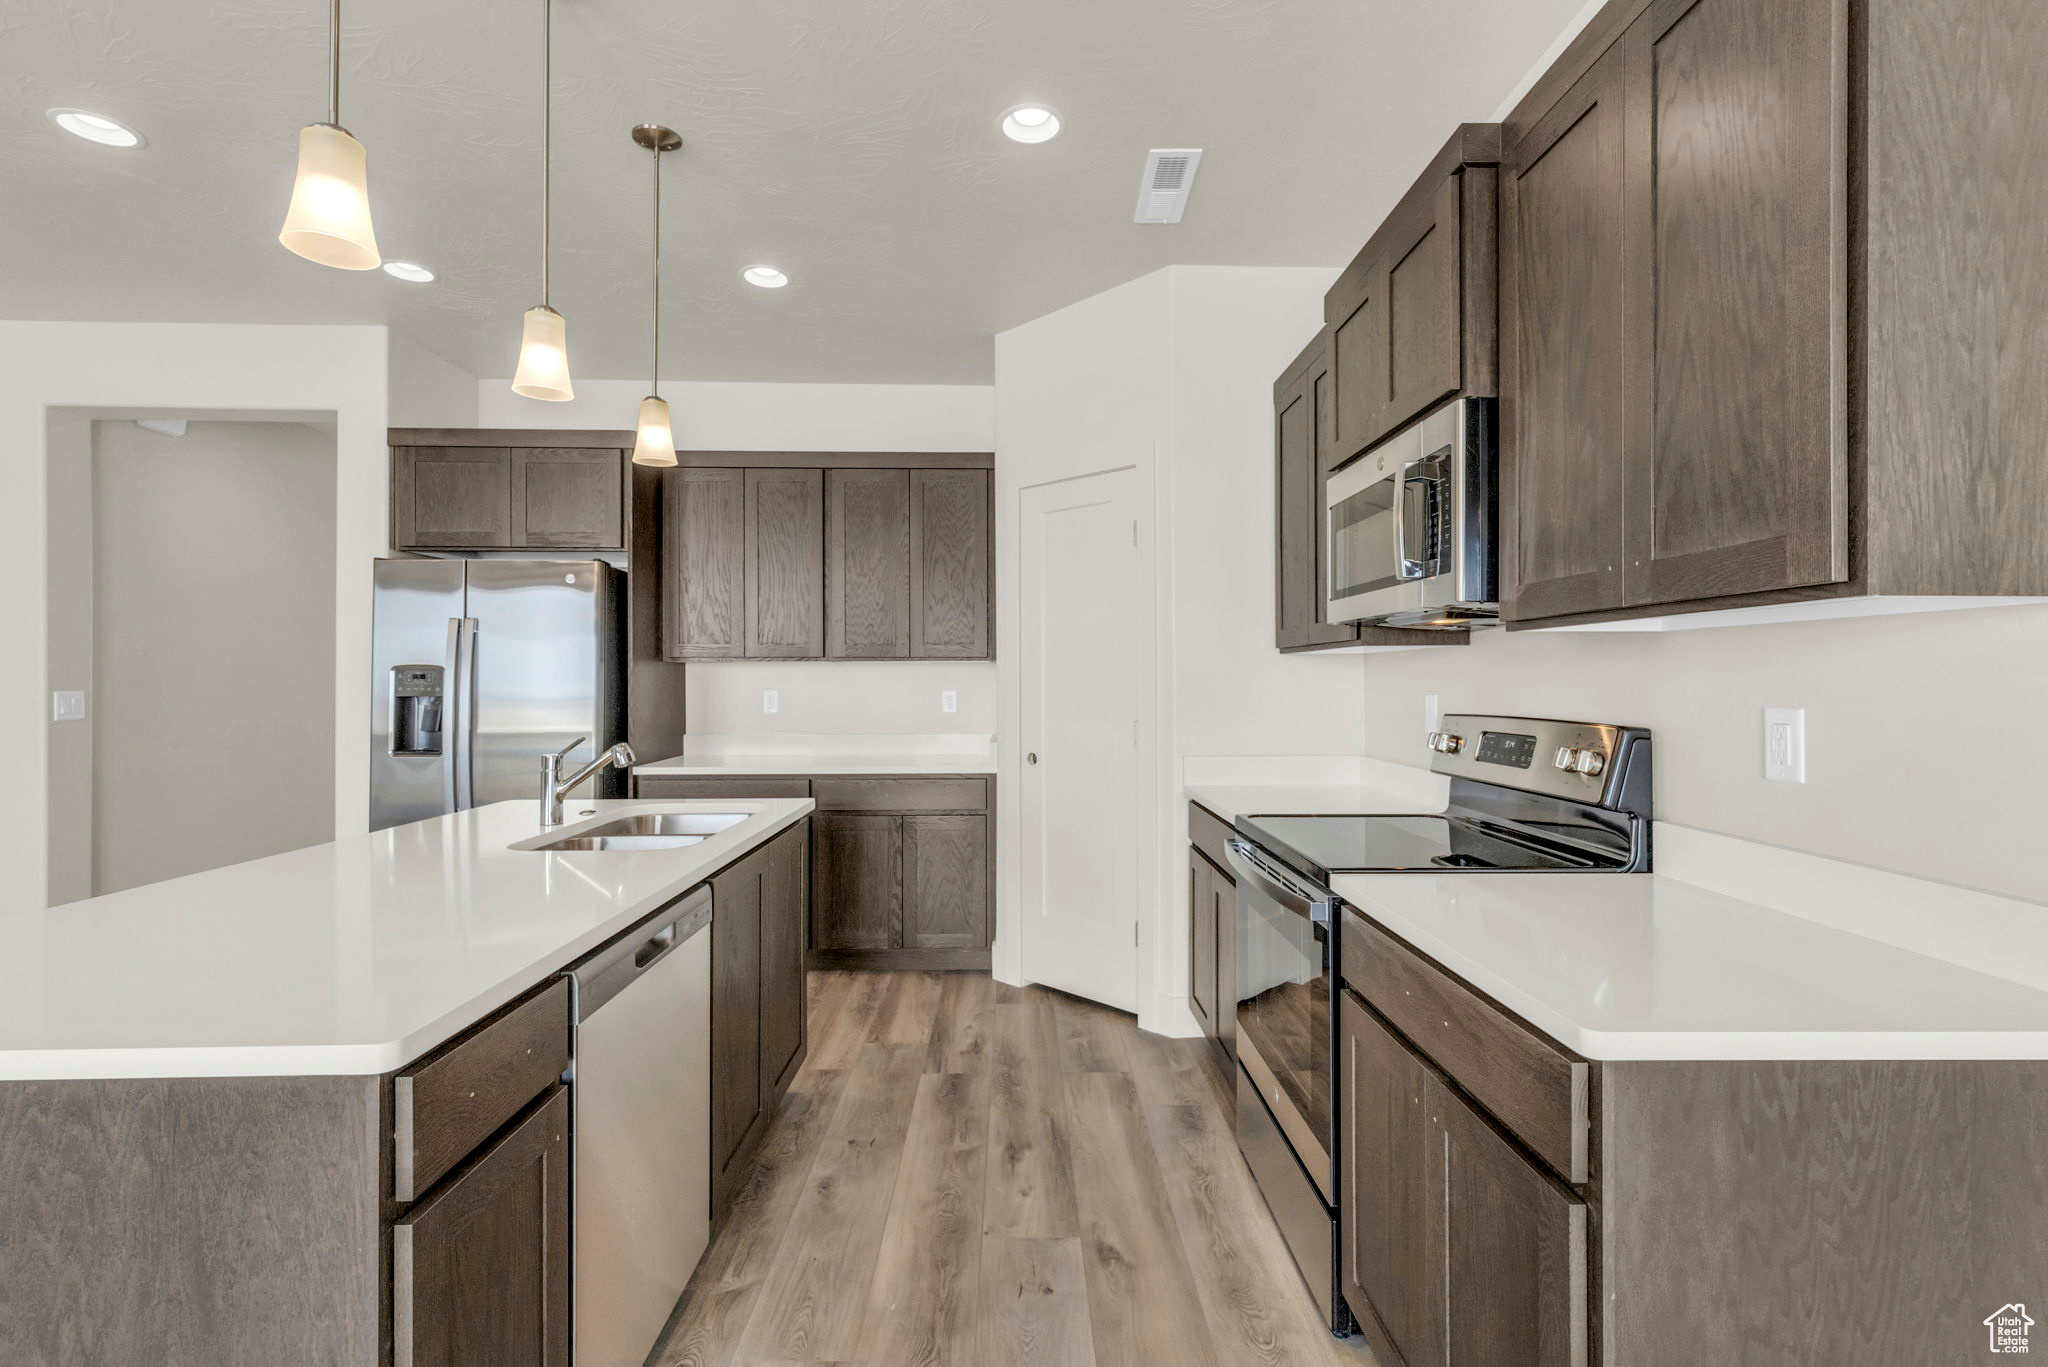 Kitchen featuring light hardwood / wood-style floors, a kitchen island with sink, dark brown cabinets, stainless steel appliances, and pendant lighting